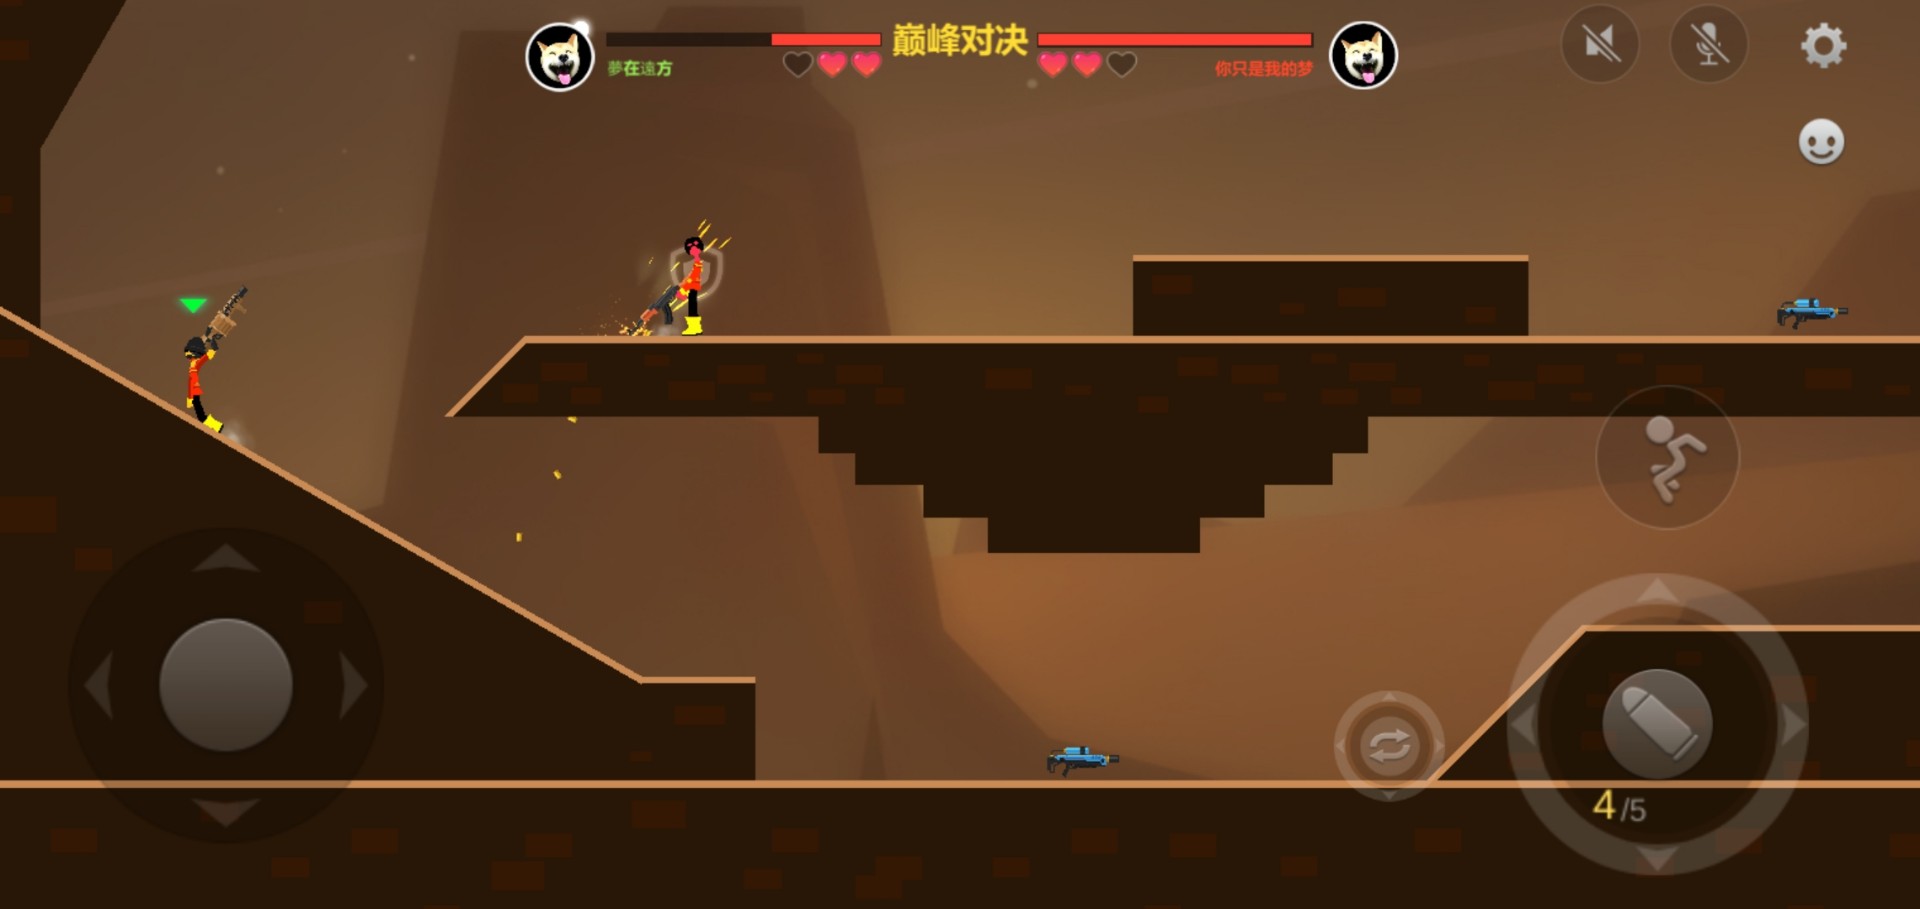  Screenshot of official mobile game app of Match Man